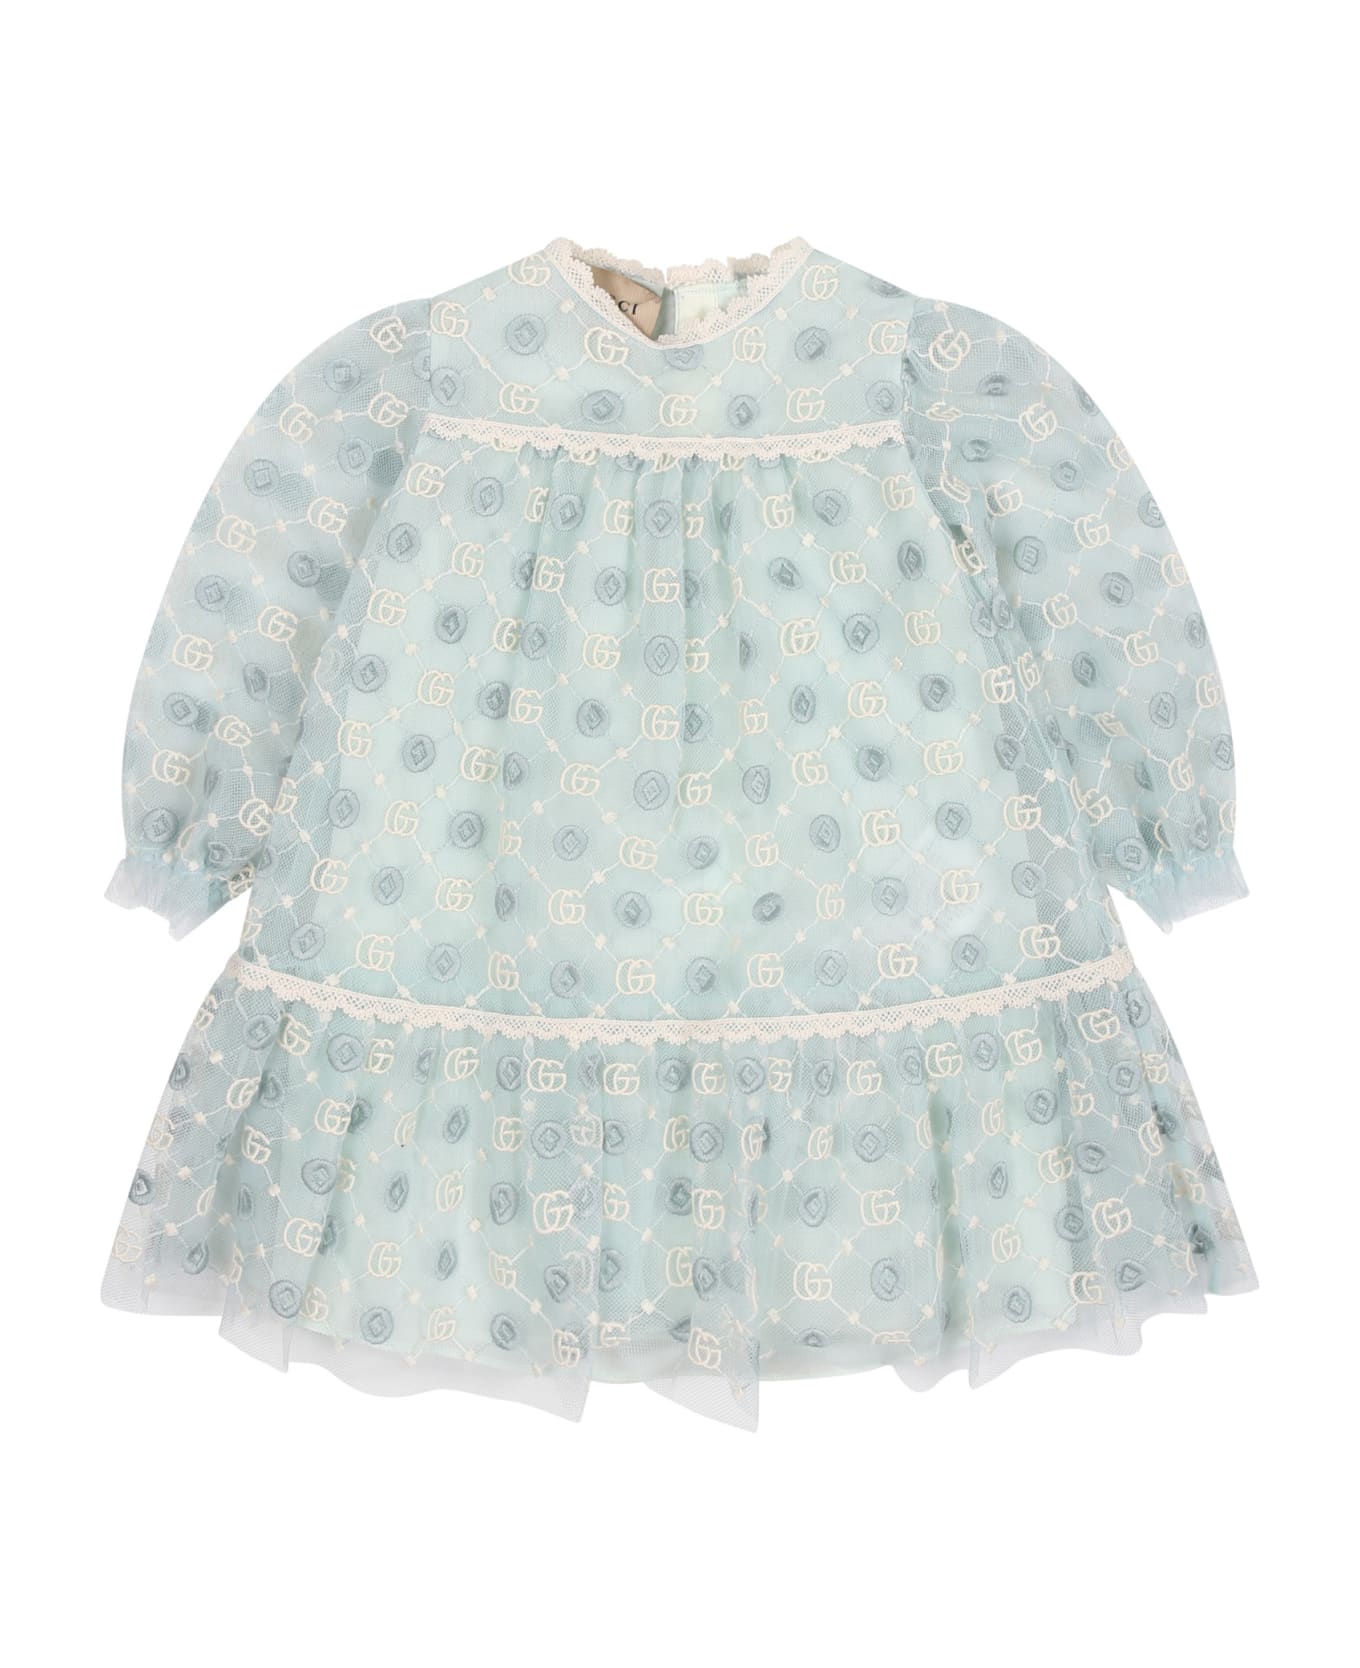 Gucci Light Blue Dress For Baby Girl With Geometric Pattern And Double G - Light Blue ウェア